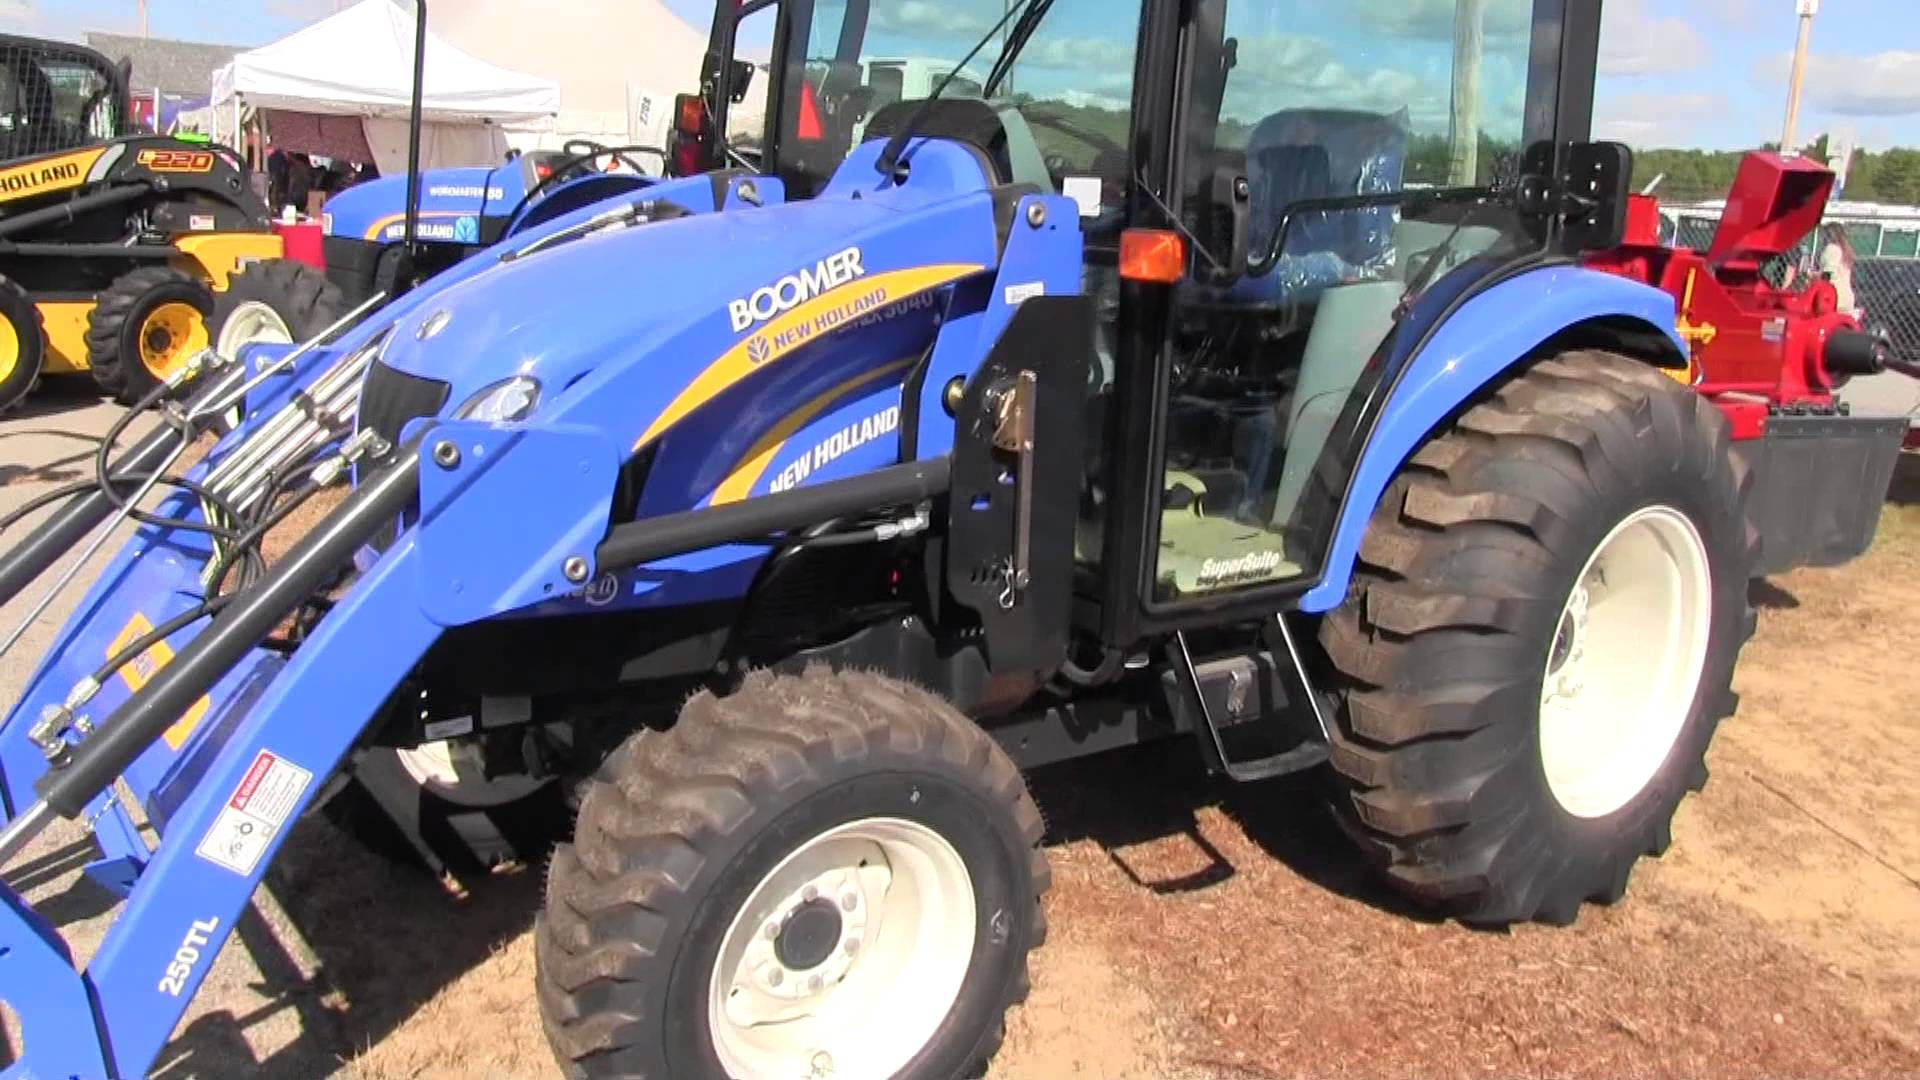 New Holland Boomer 3040 Tractor - YouTube